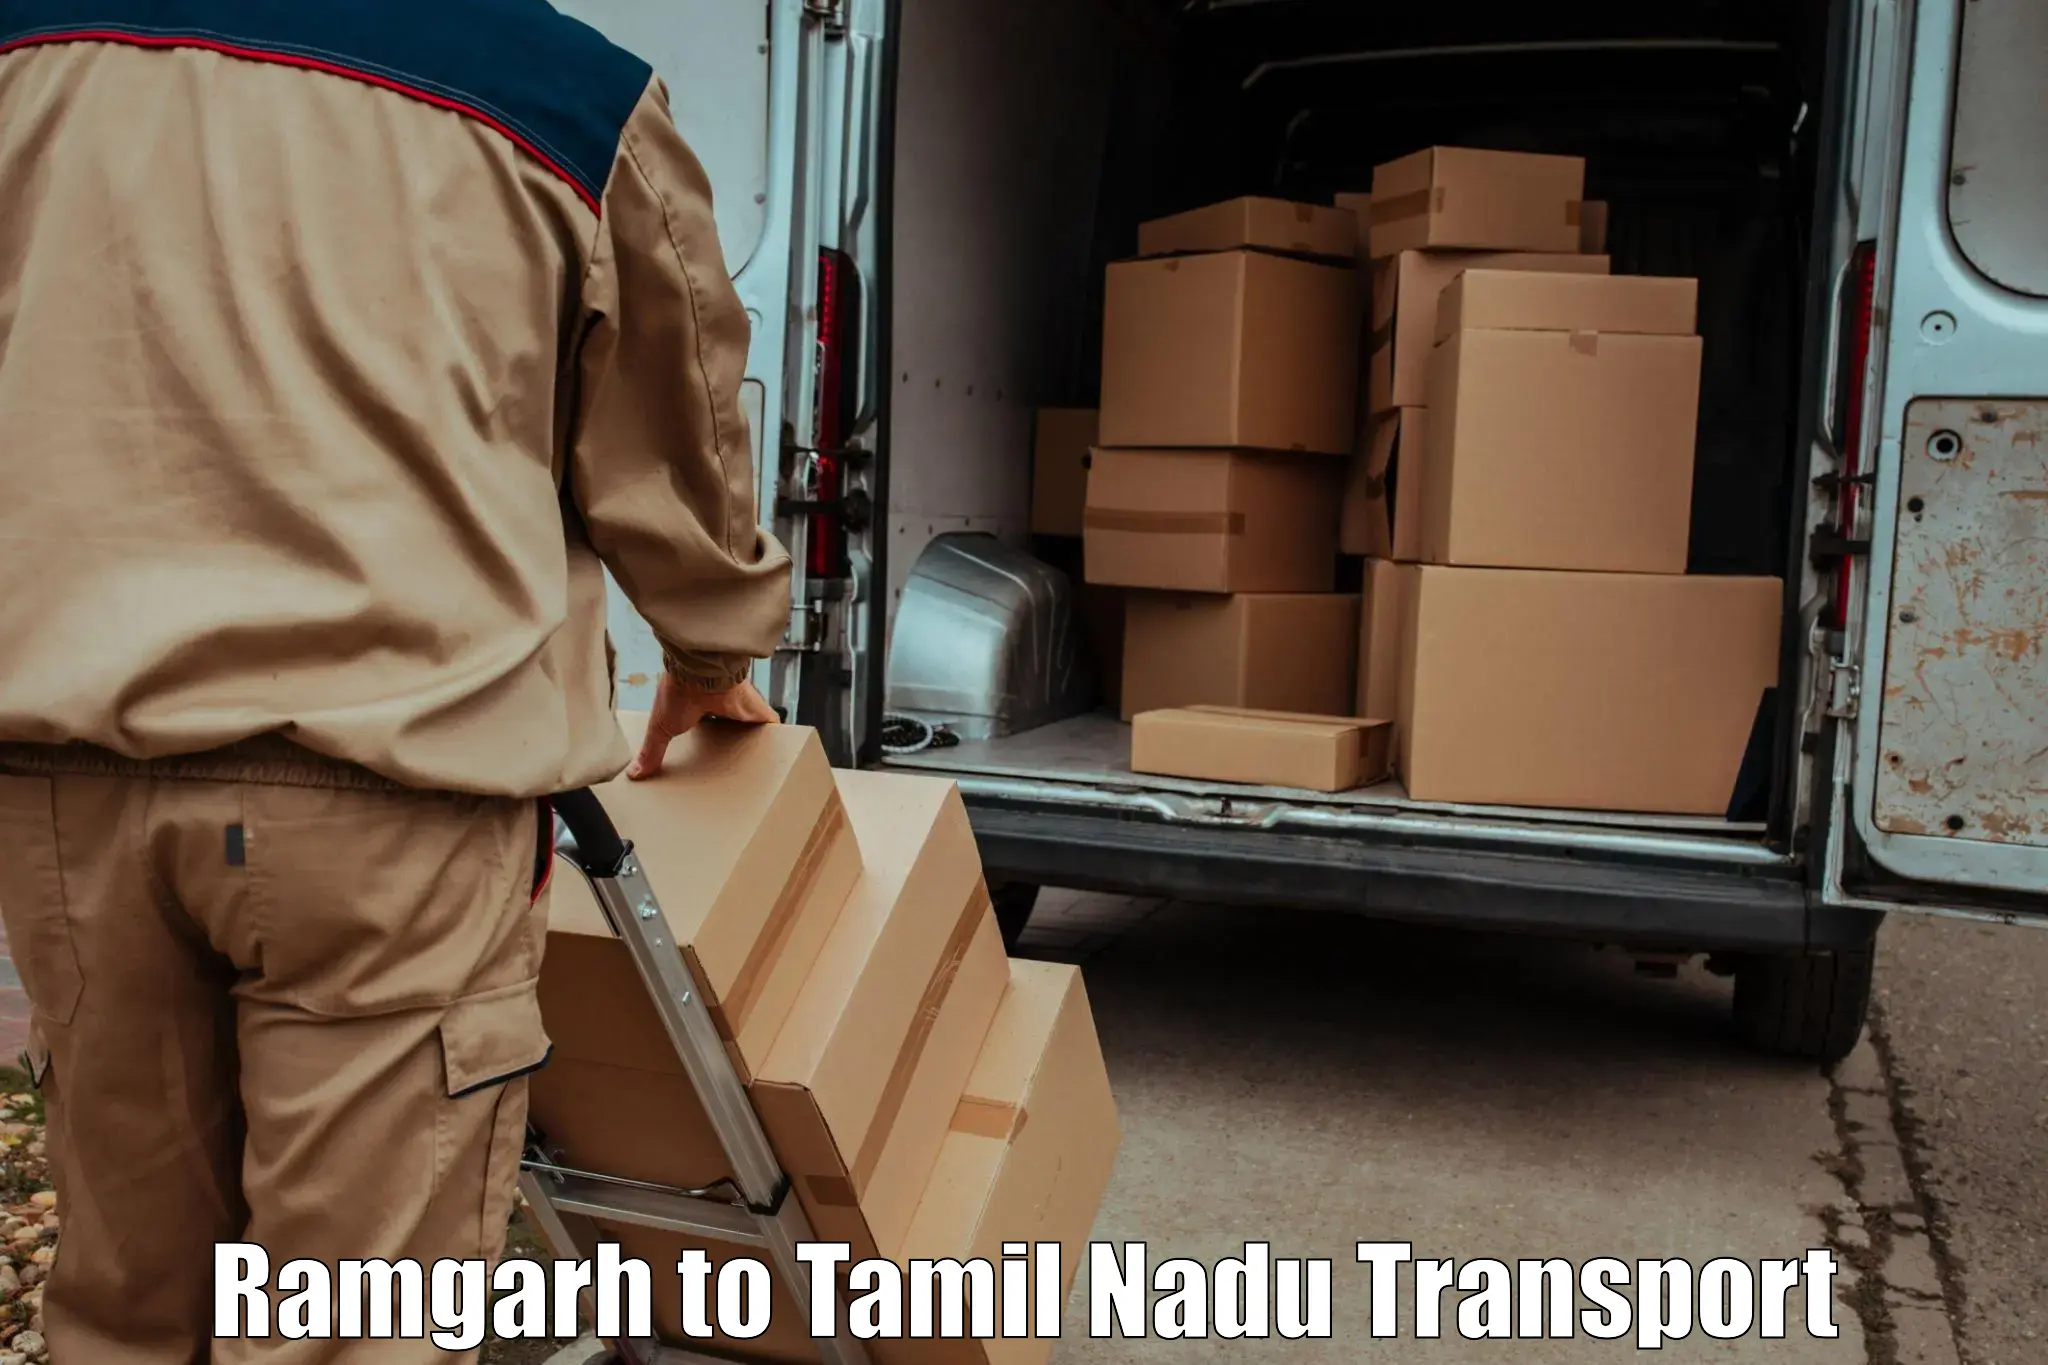 Air freight transport services in Ramgarh to Harur